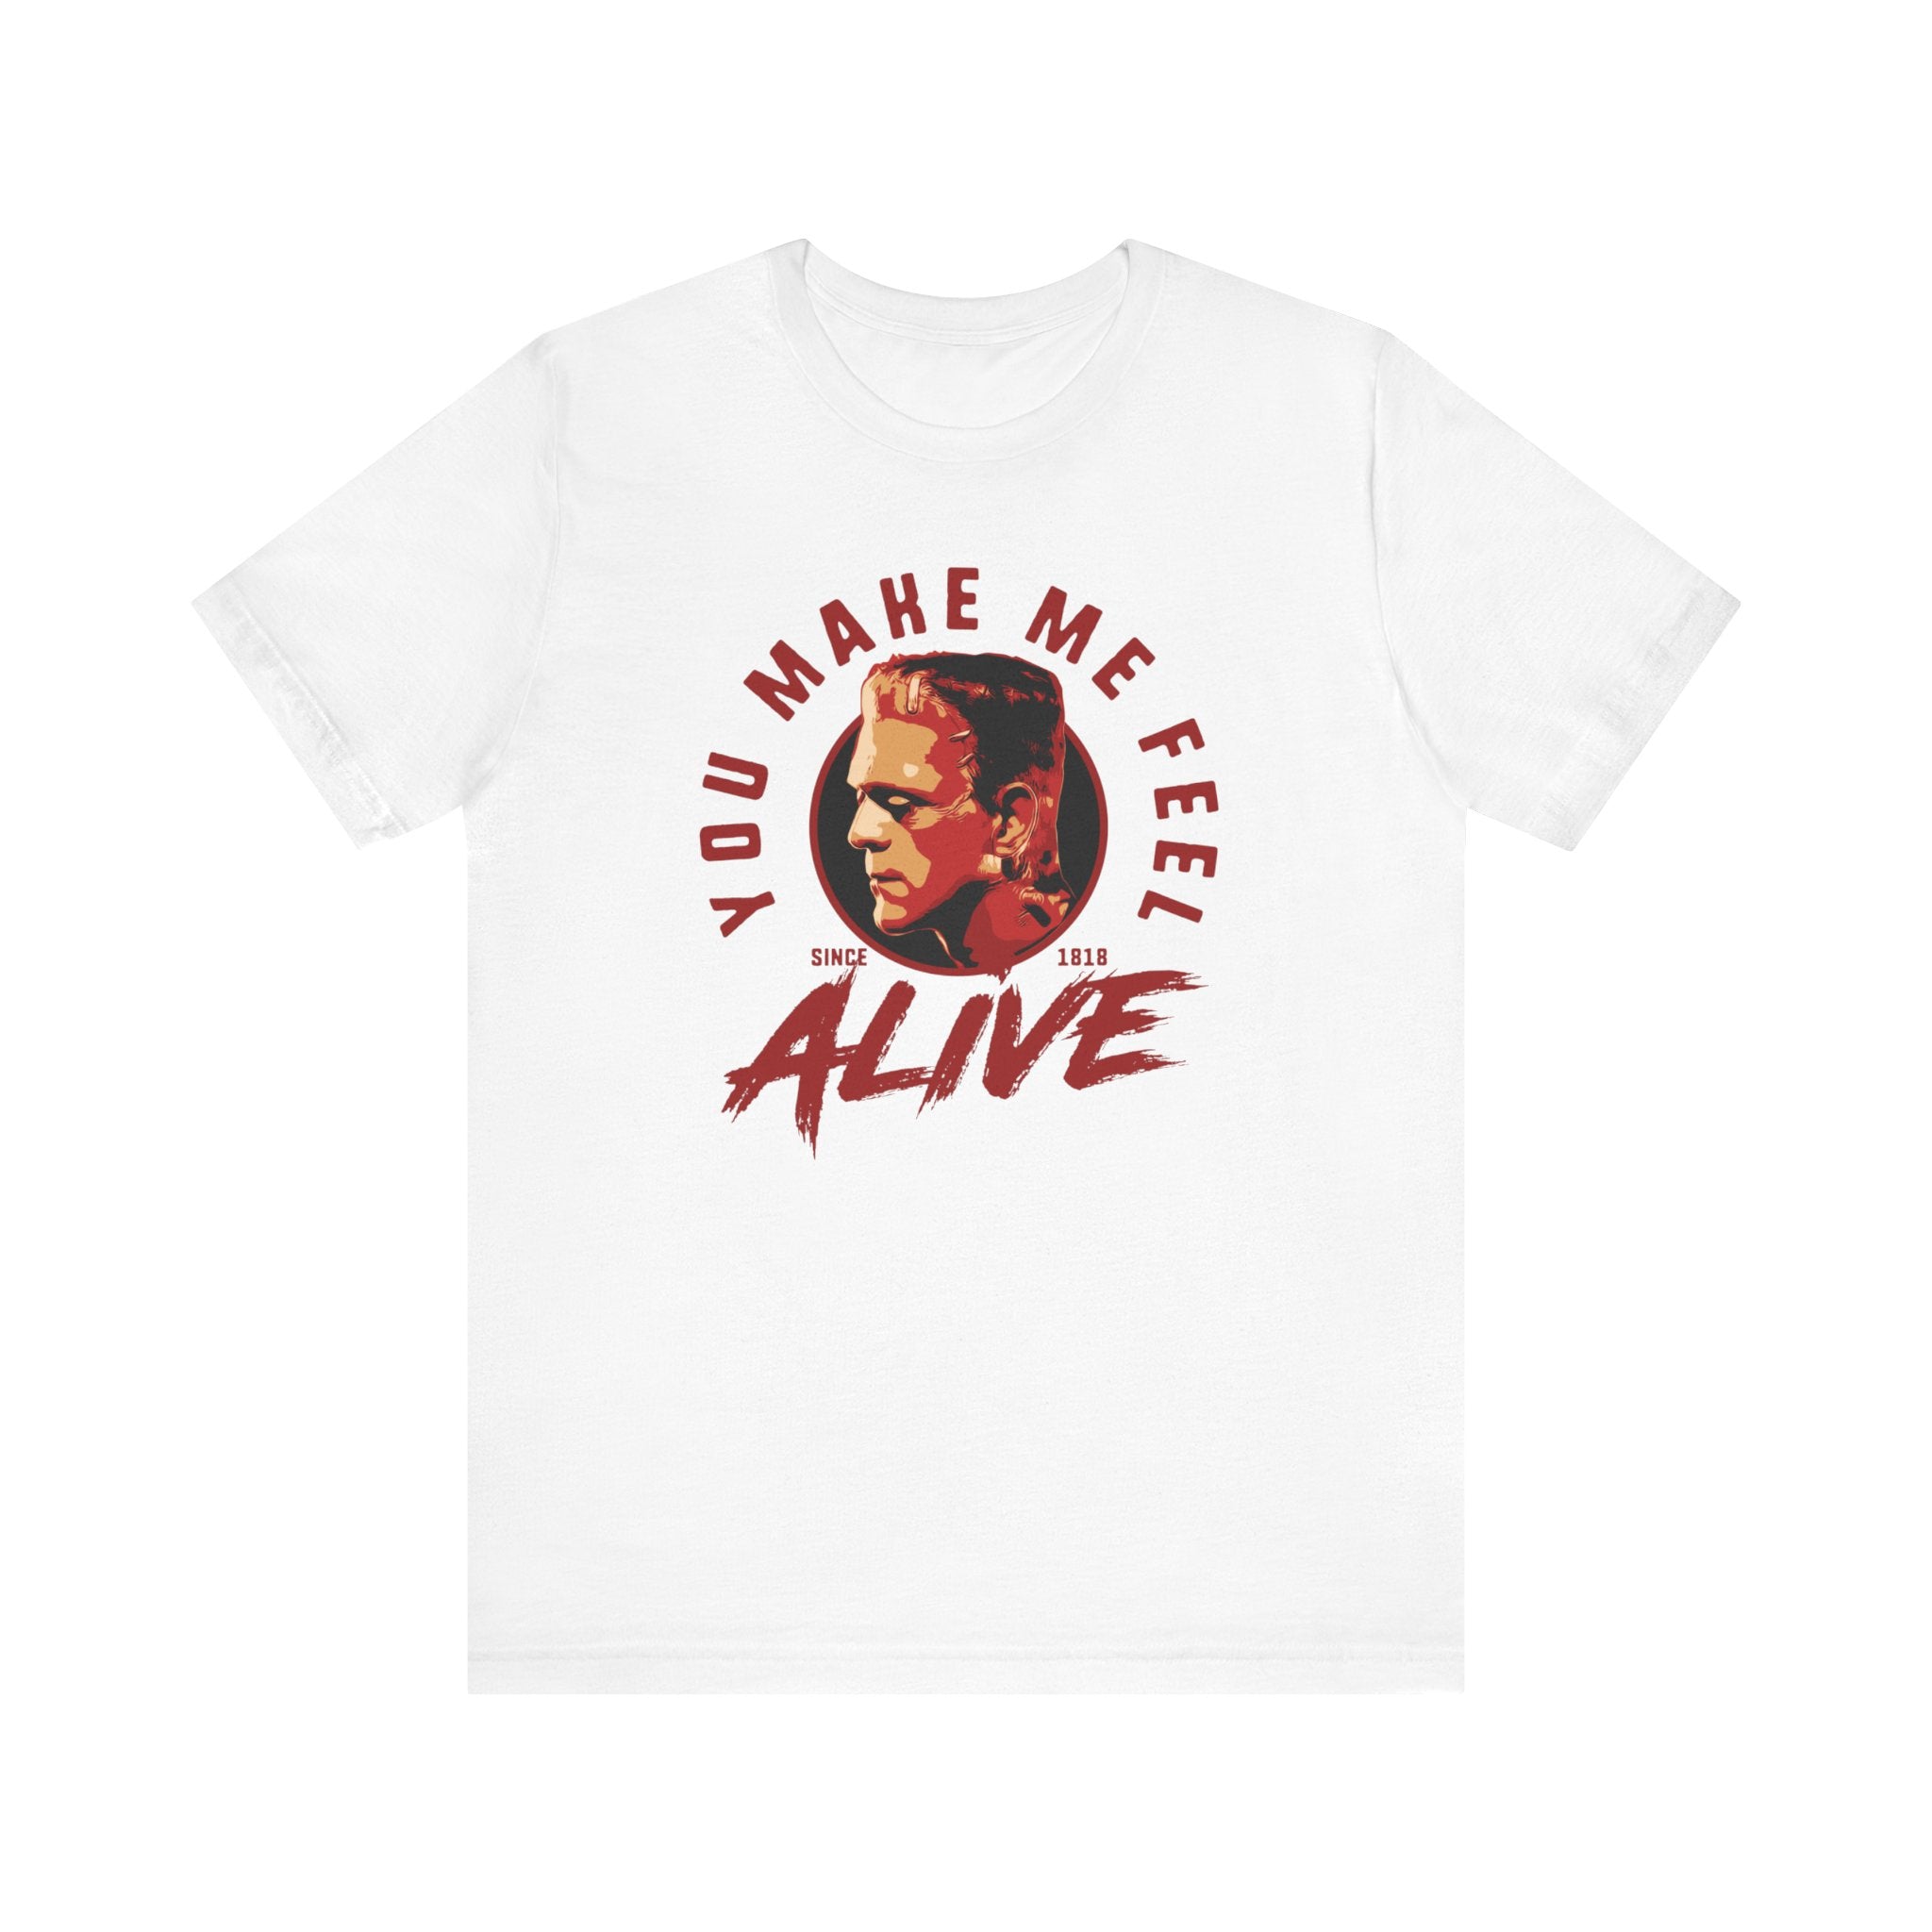 White t-shirt featuring a quality print of a man's face with the text "You Make Me Feel Alive" in red and black font.